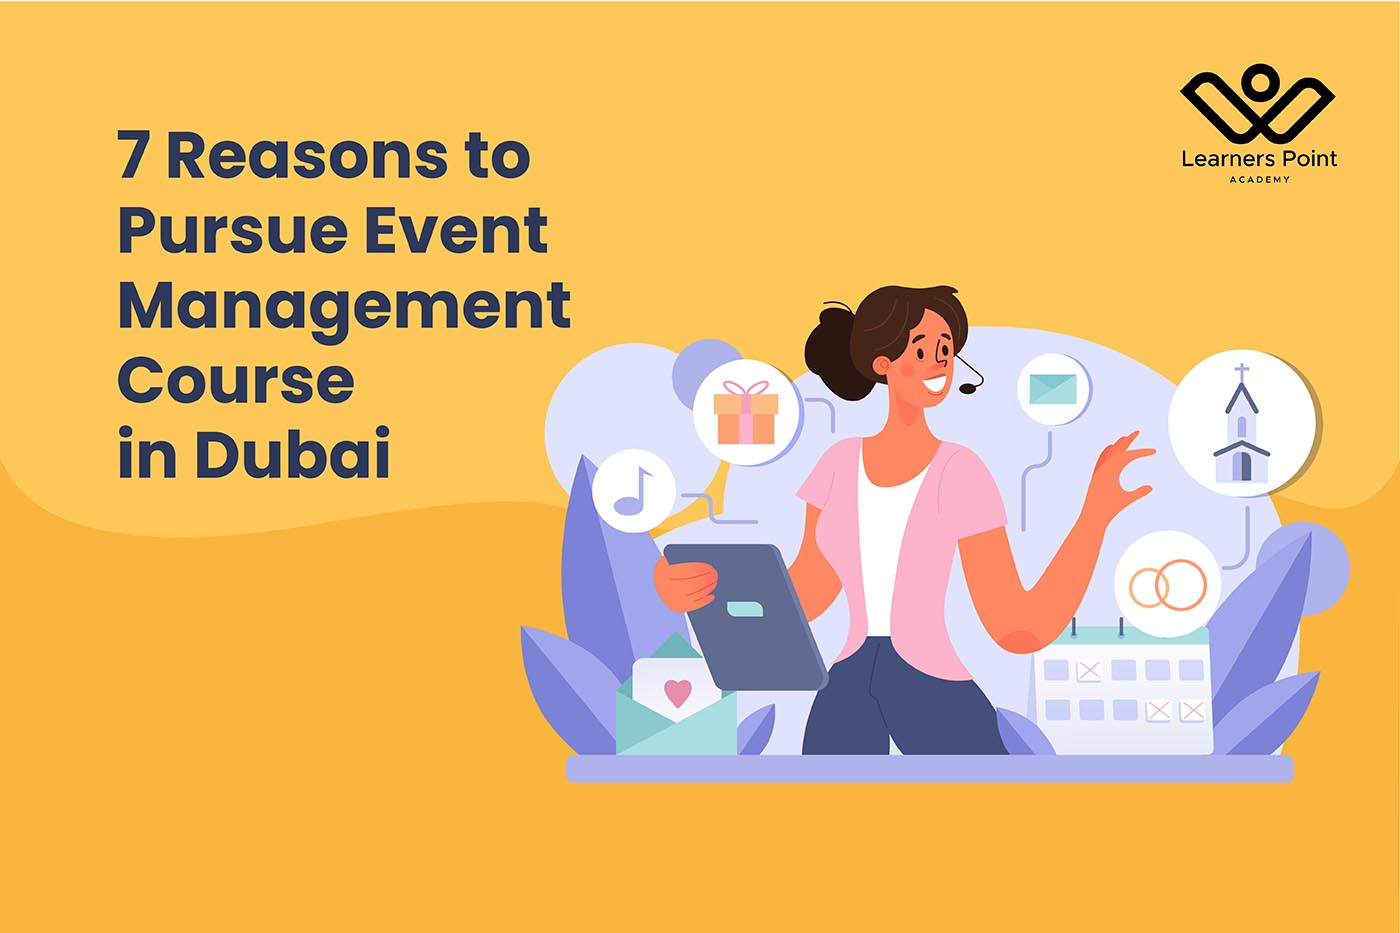 7 Reasons to Pursue Event Management Course in Dubai